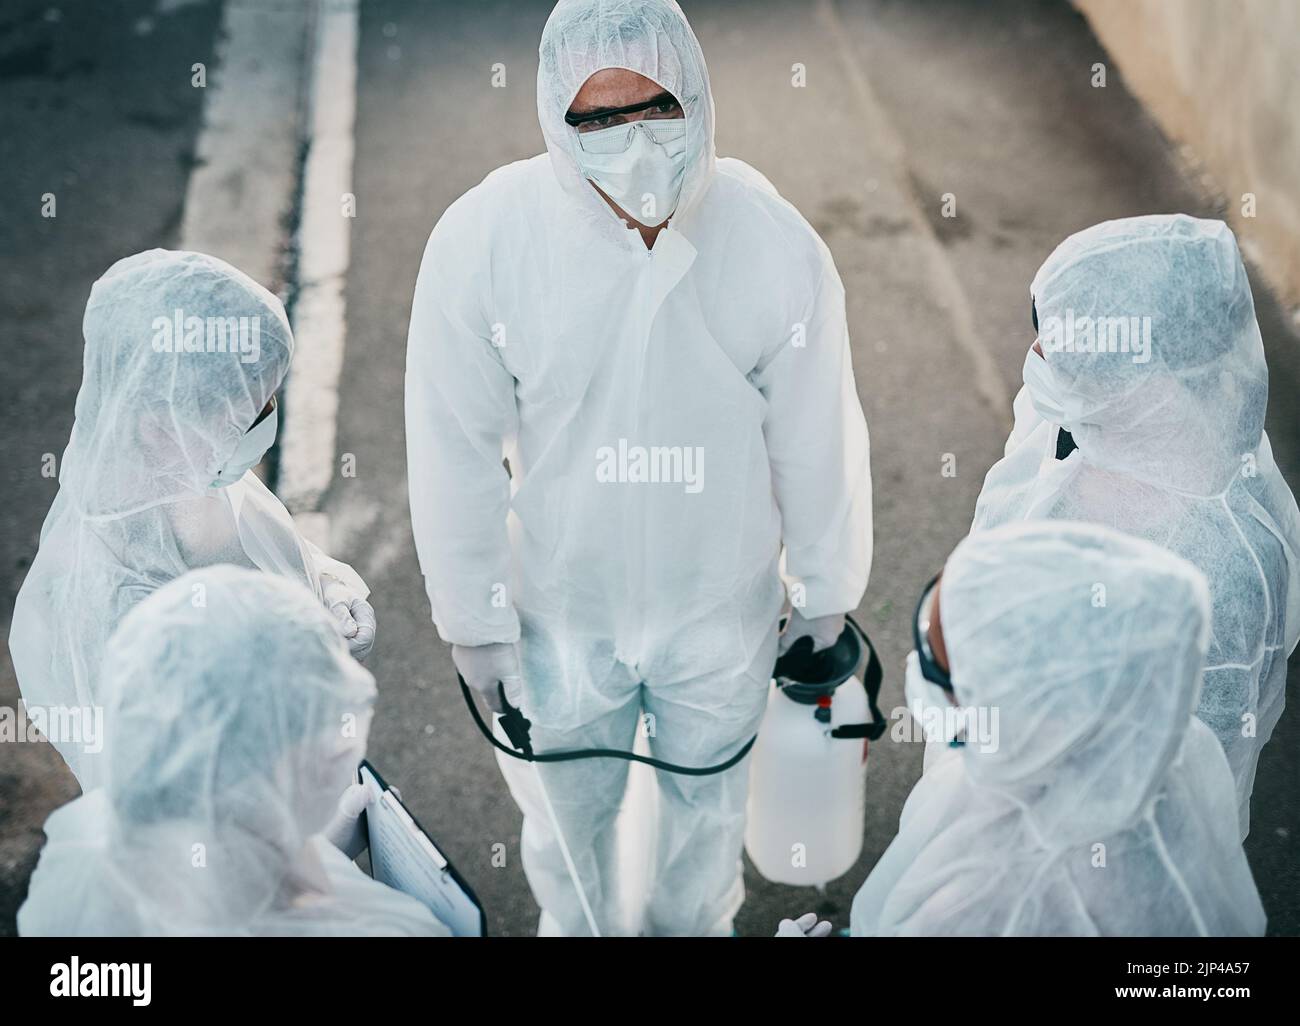 Covid pandemic outbreak team of doctors or medical workers wearing protective ppe to prevent spread of virus outside. Group of scientists wearing Stock Photo